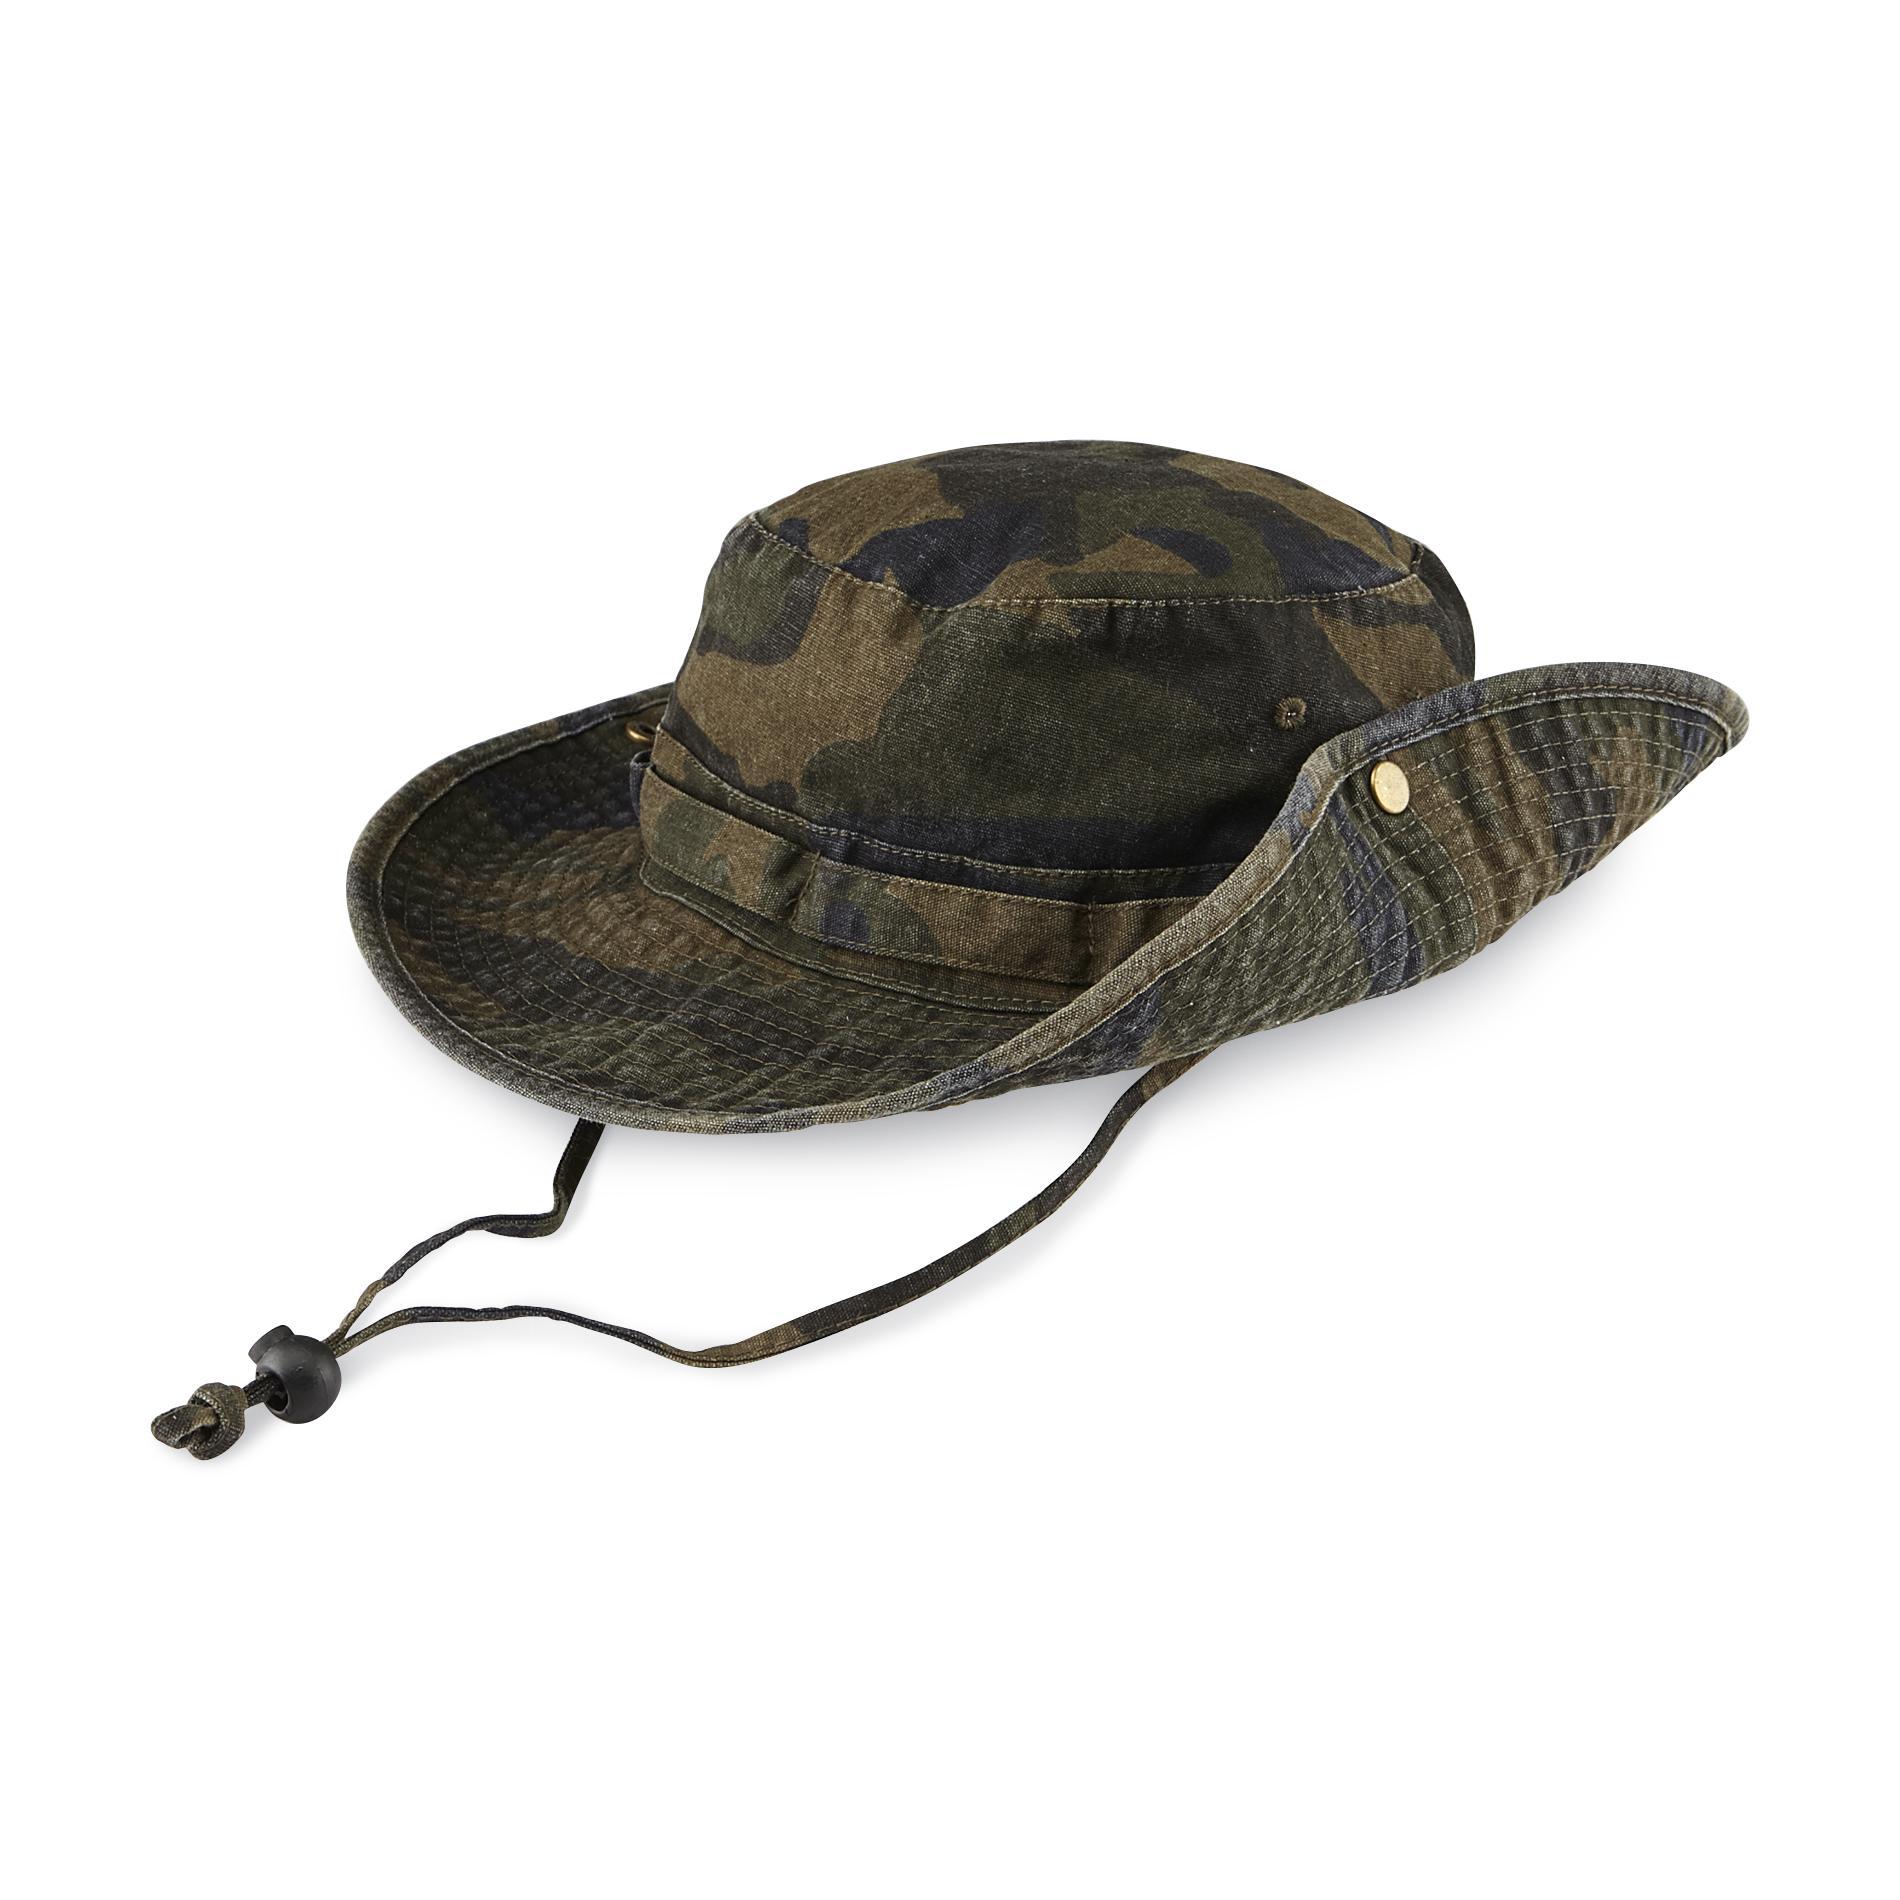 Outdoor Life Men's Packable Canvas Boonie Hat - Camouflage